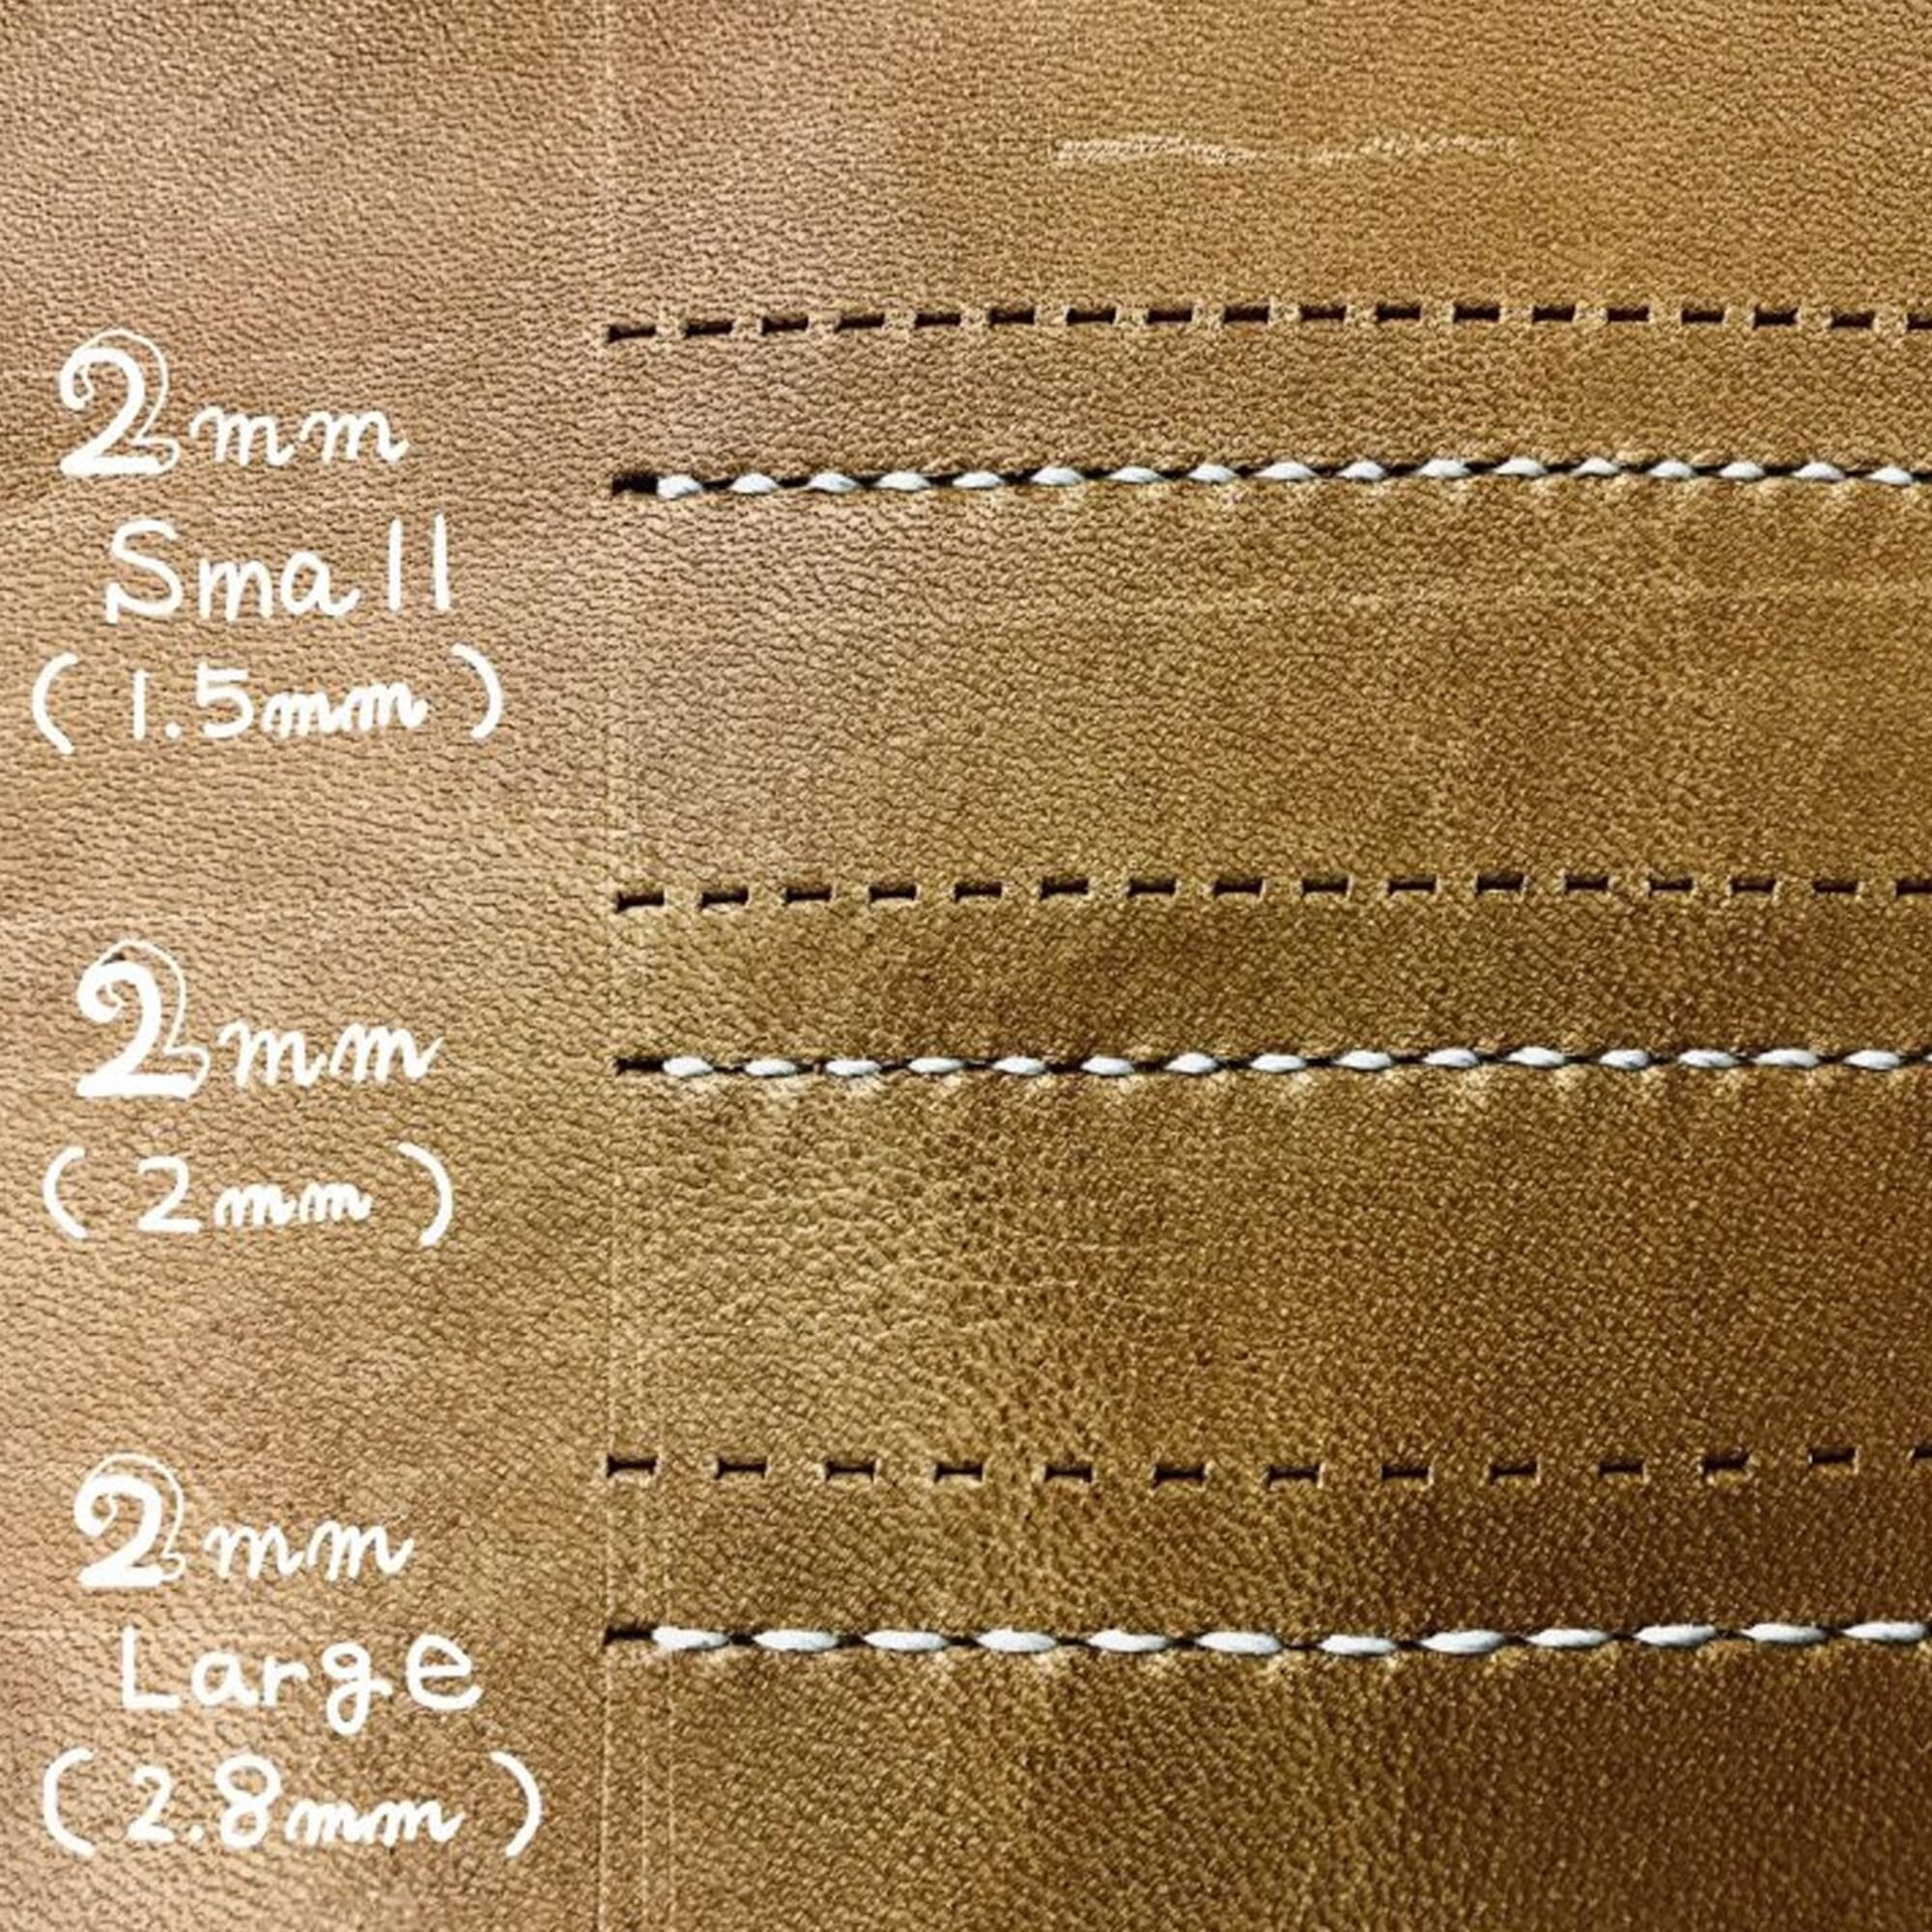 leather lacing techniques - Google Search  Leather and lace, Sewing  leather, Leather working patterns